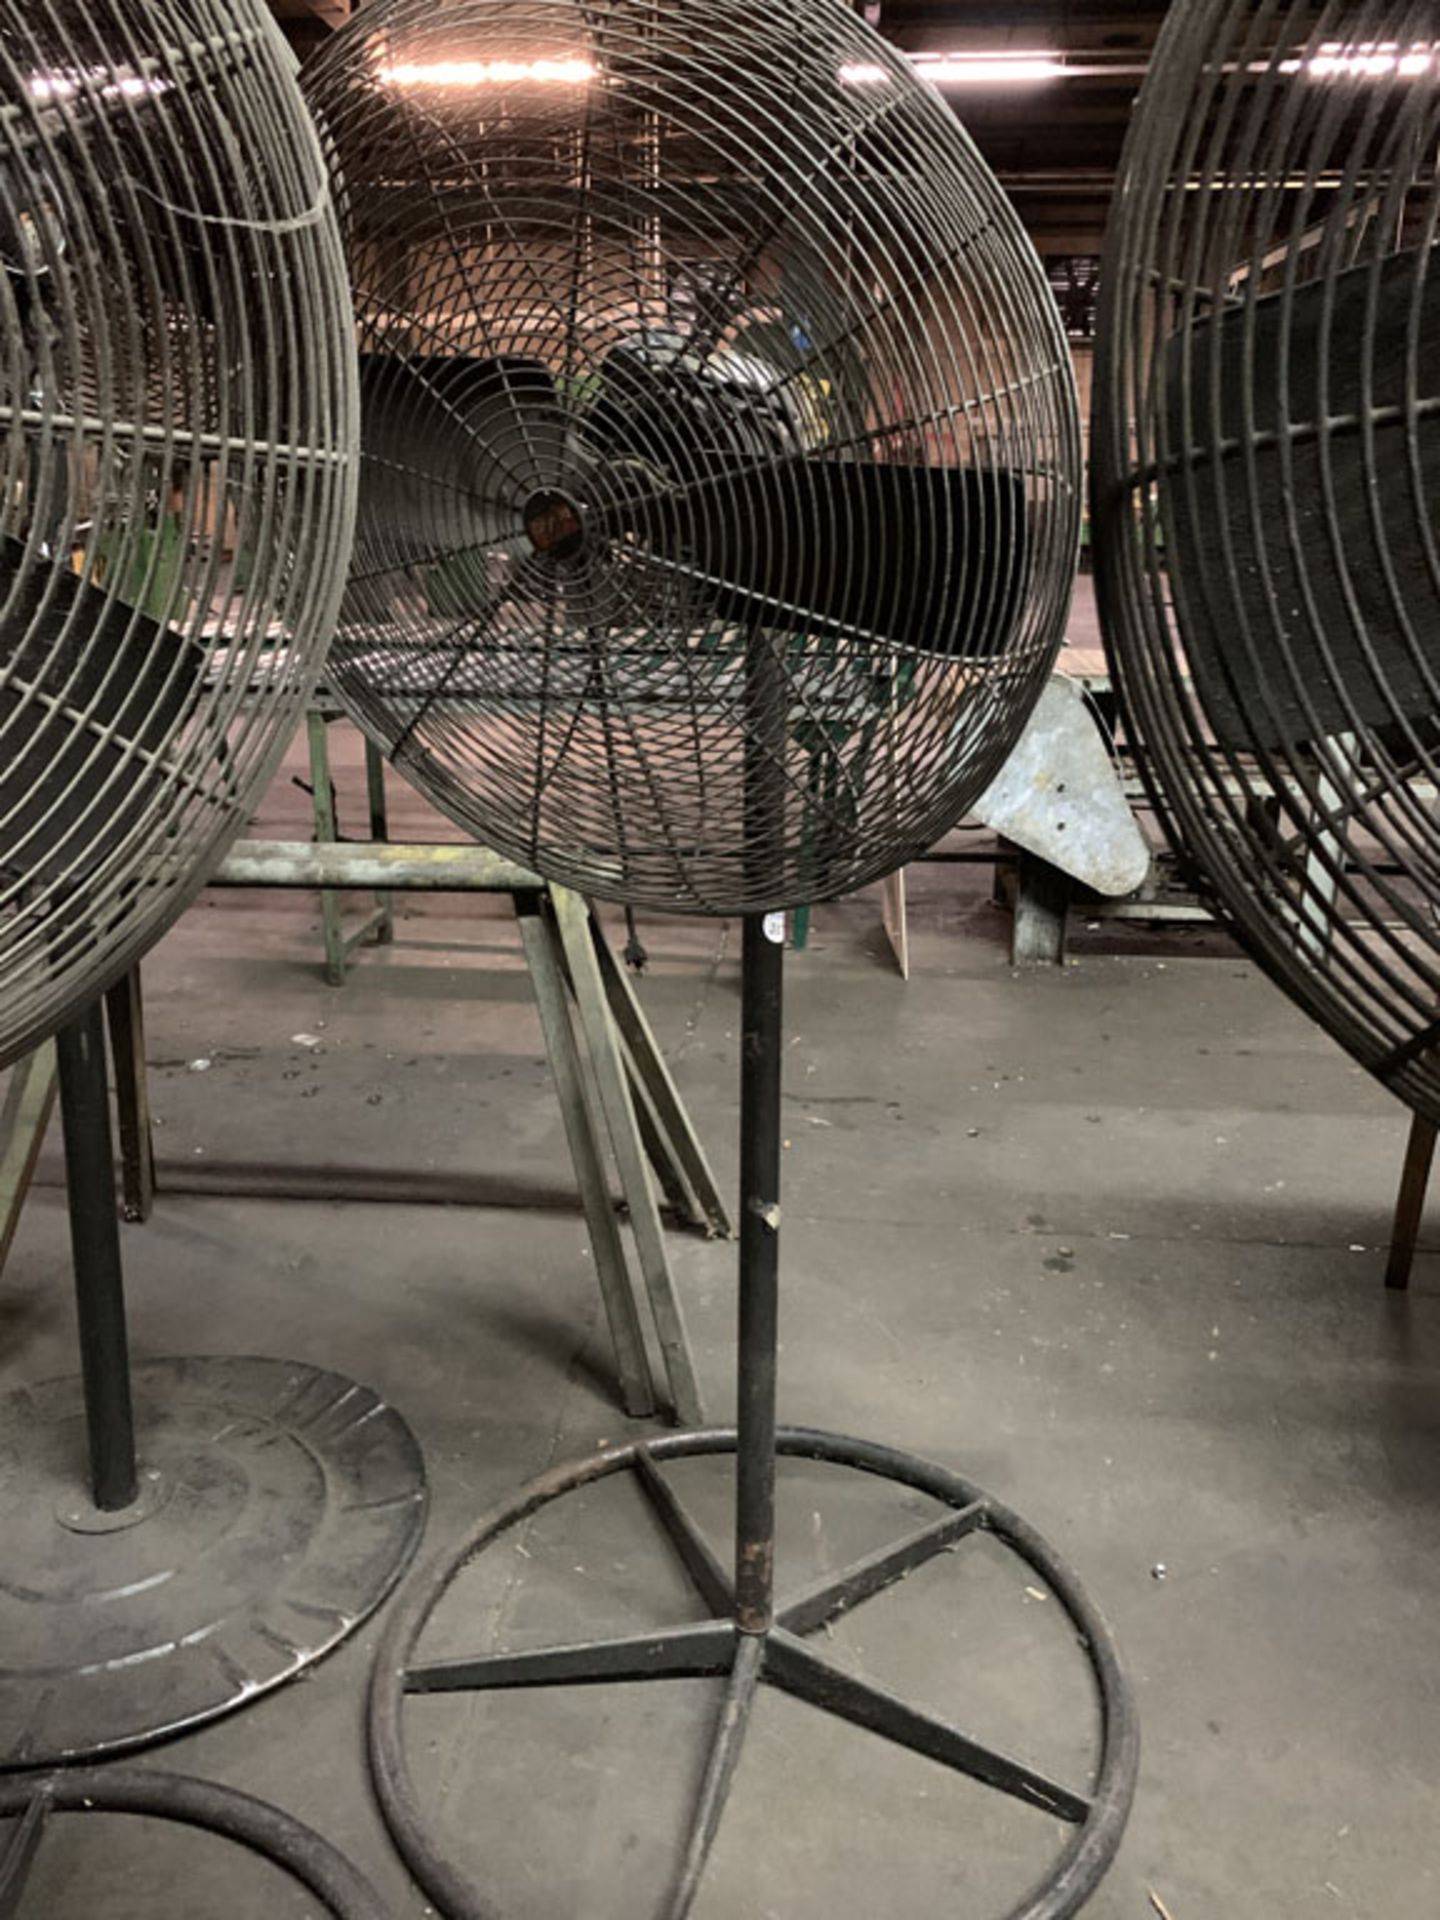 Fan, 2 blade on stand 30"